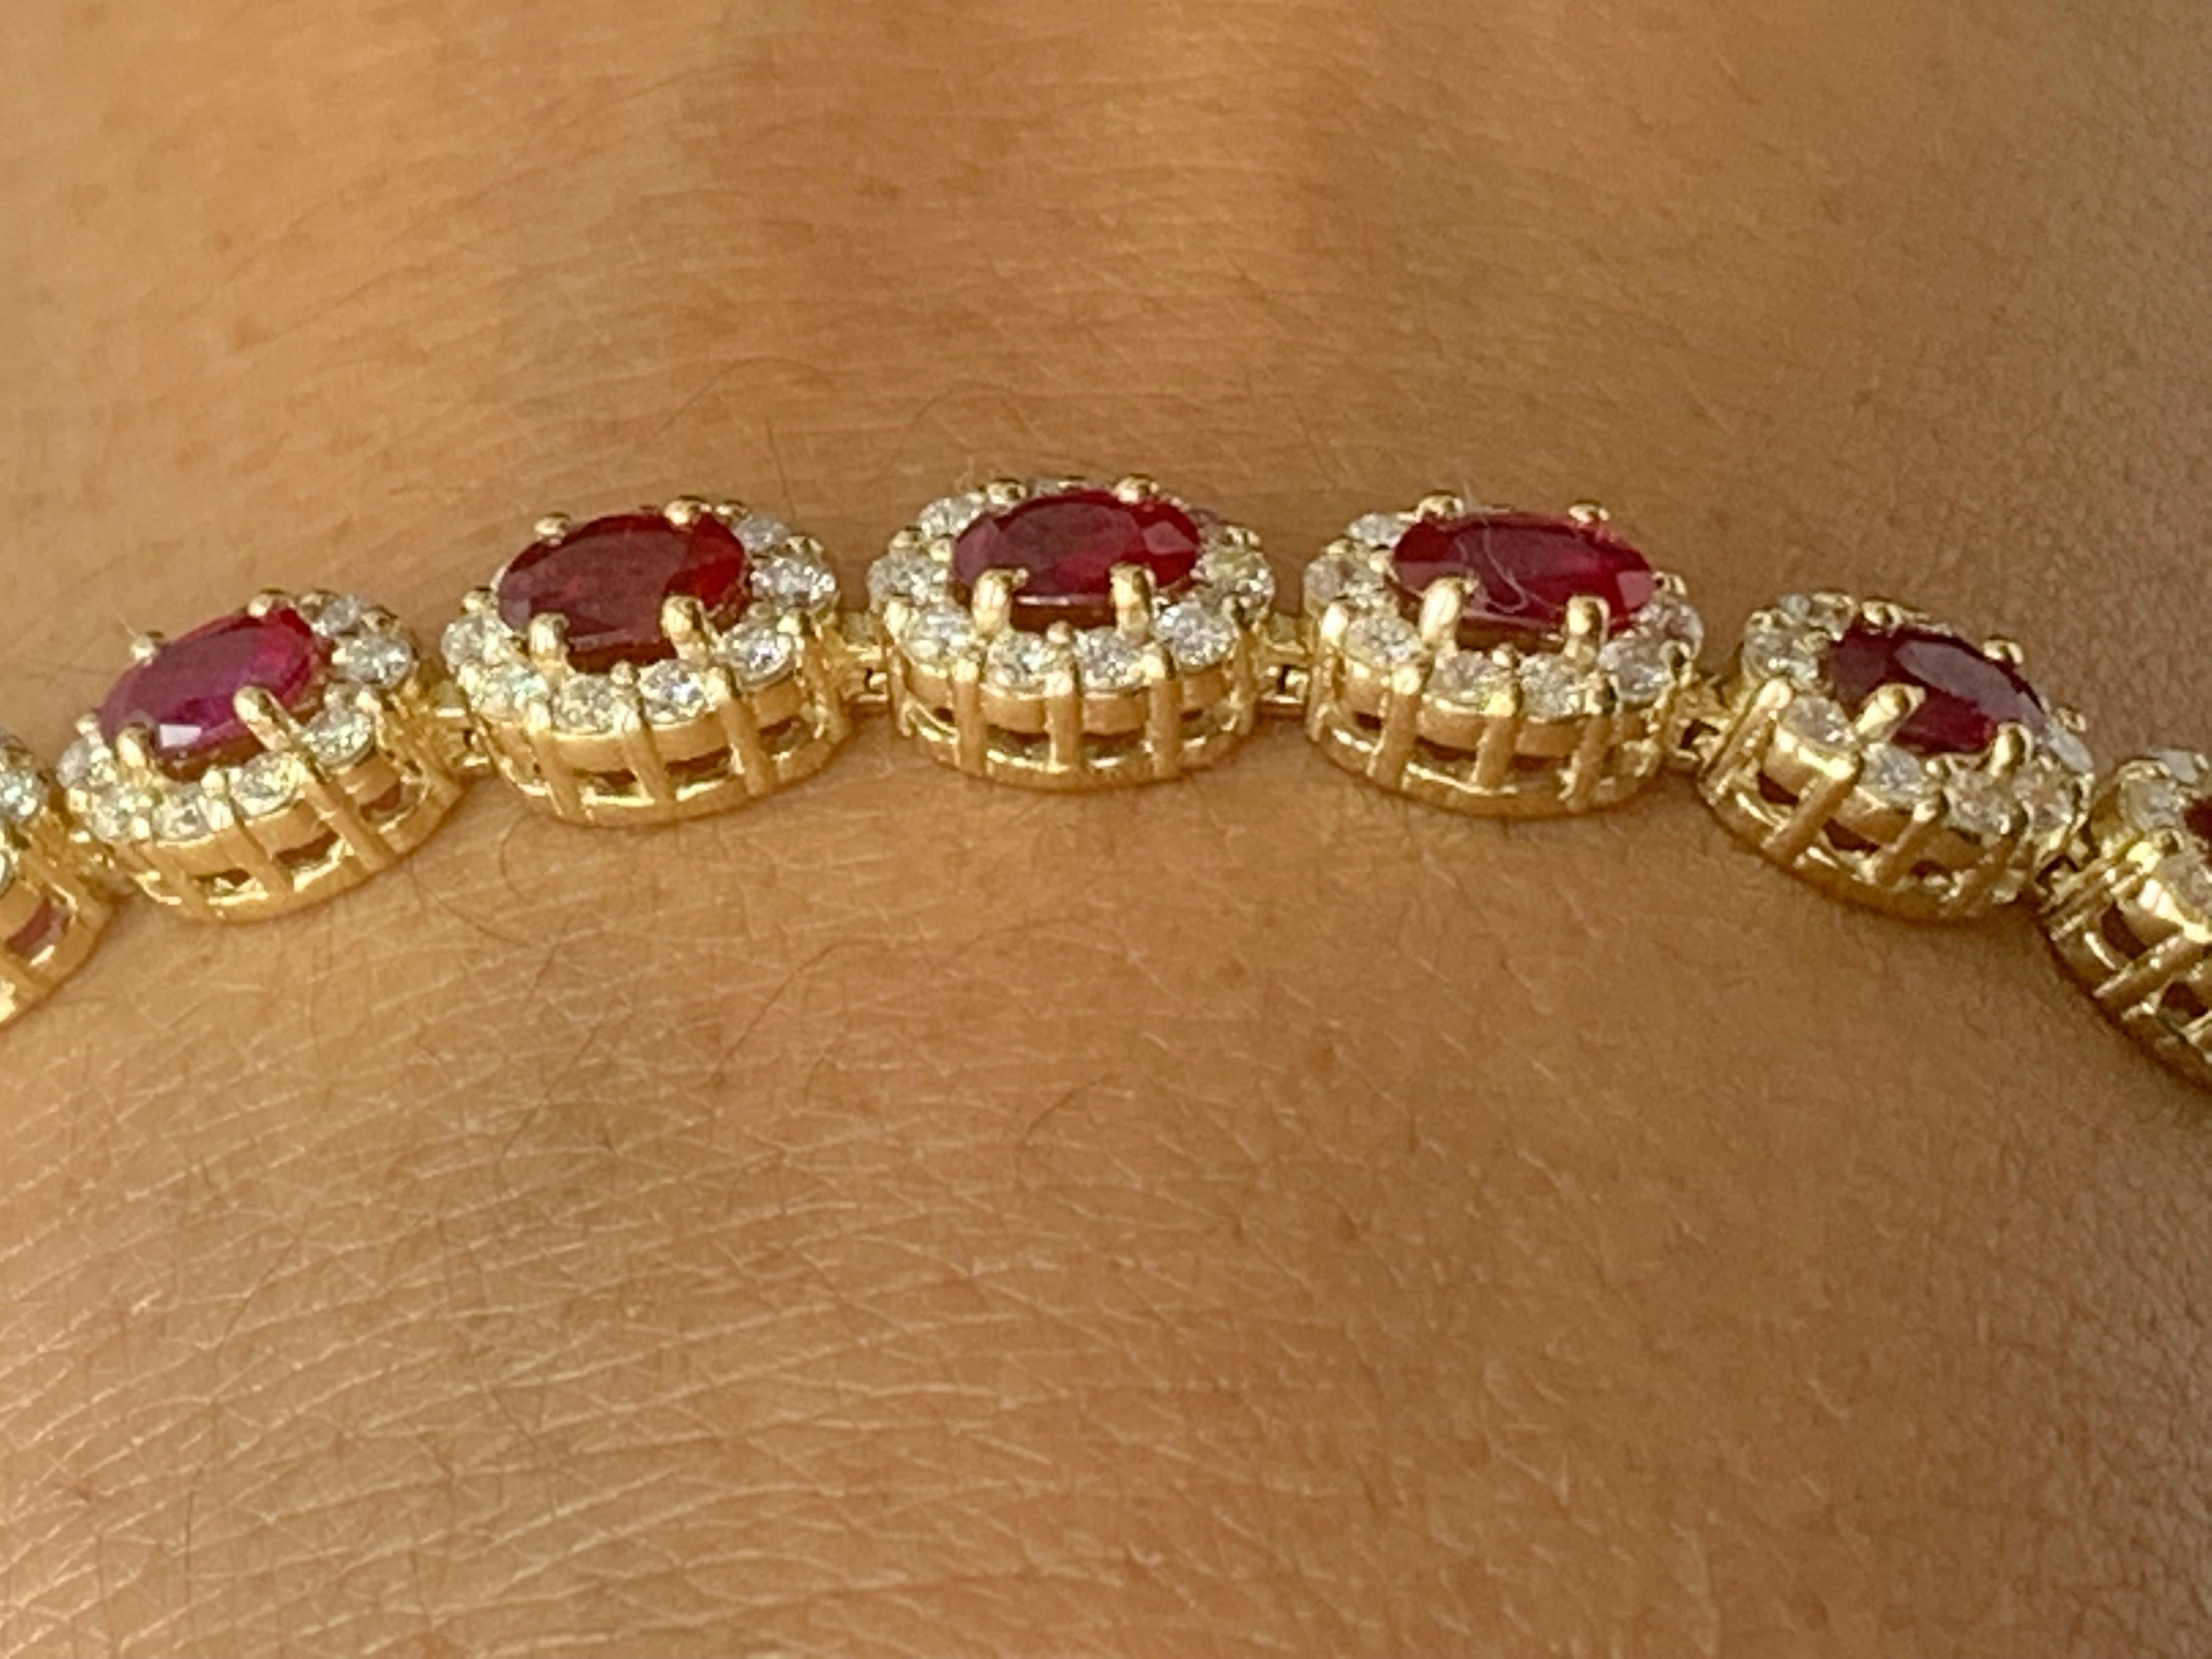 6.43 Carat Oval Cut Ruby and Diamond Halo Bracelet in 14K Yellow Gold For Sale 1